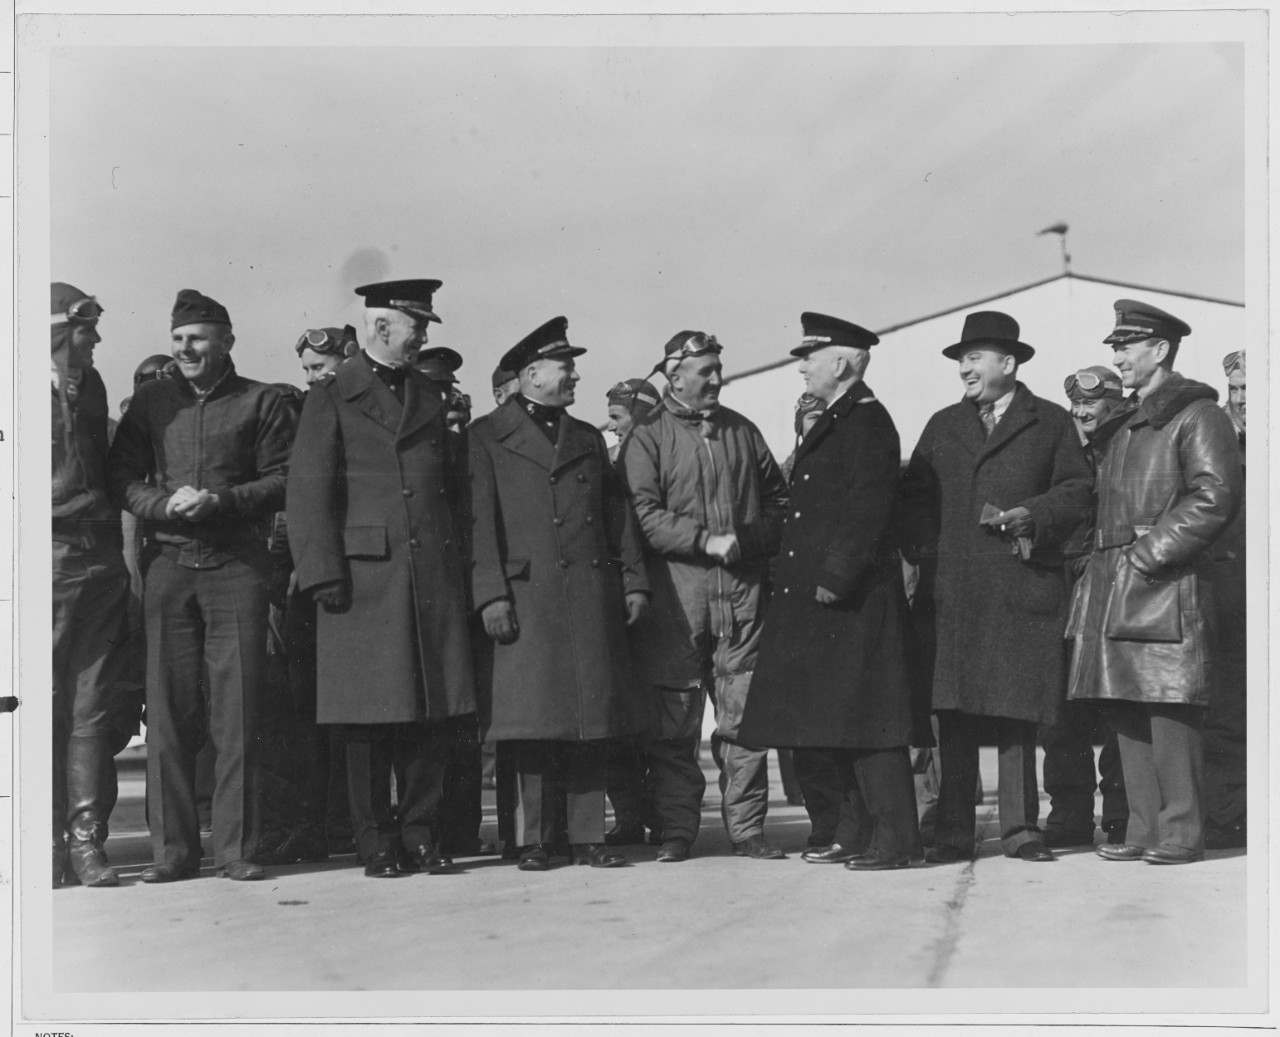 Left to right; Fuller B. H. Major General, USMC., Geiger, George R.S. Major USMC., Mulcahy, E.P. Capt., USMC., Moffett, W.A, Rear Admiral USN., charge d'affairs from Nicaraguan to U.S., Childs, W.G., Comdr. USN., C.O. Anacostia, D.C